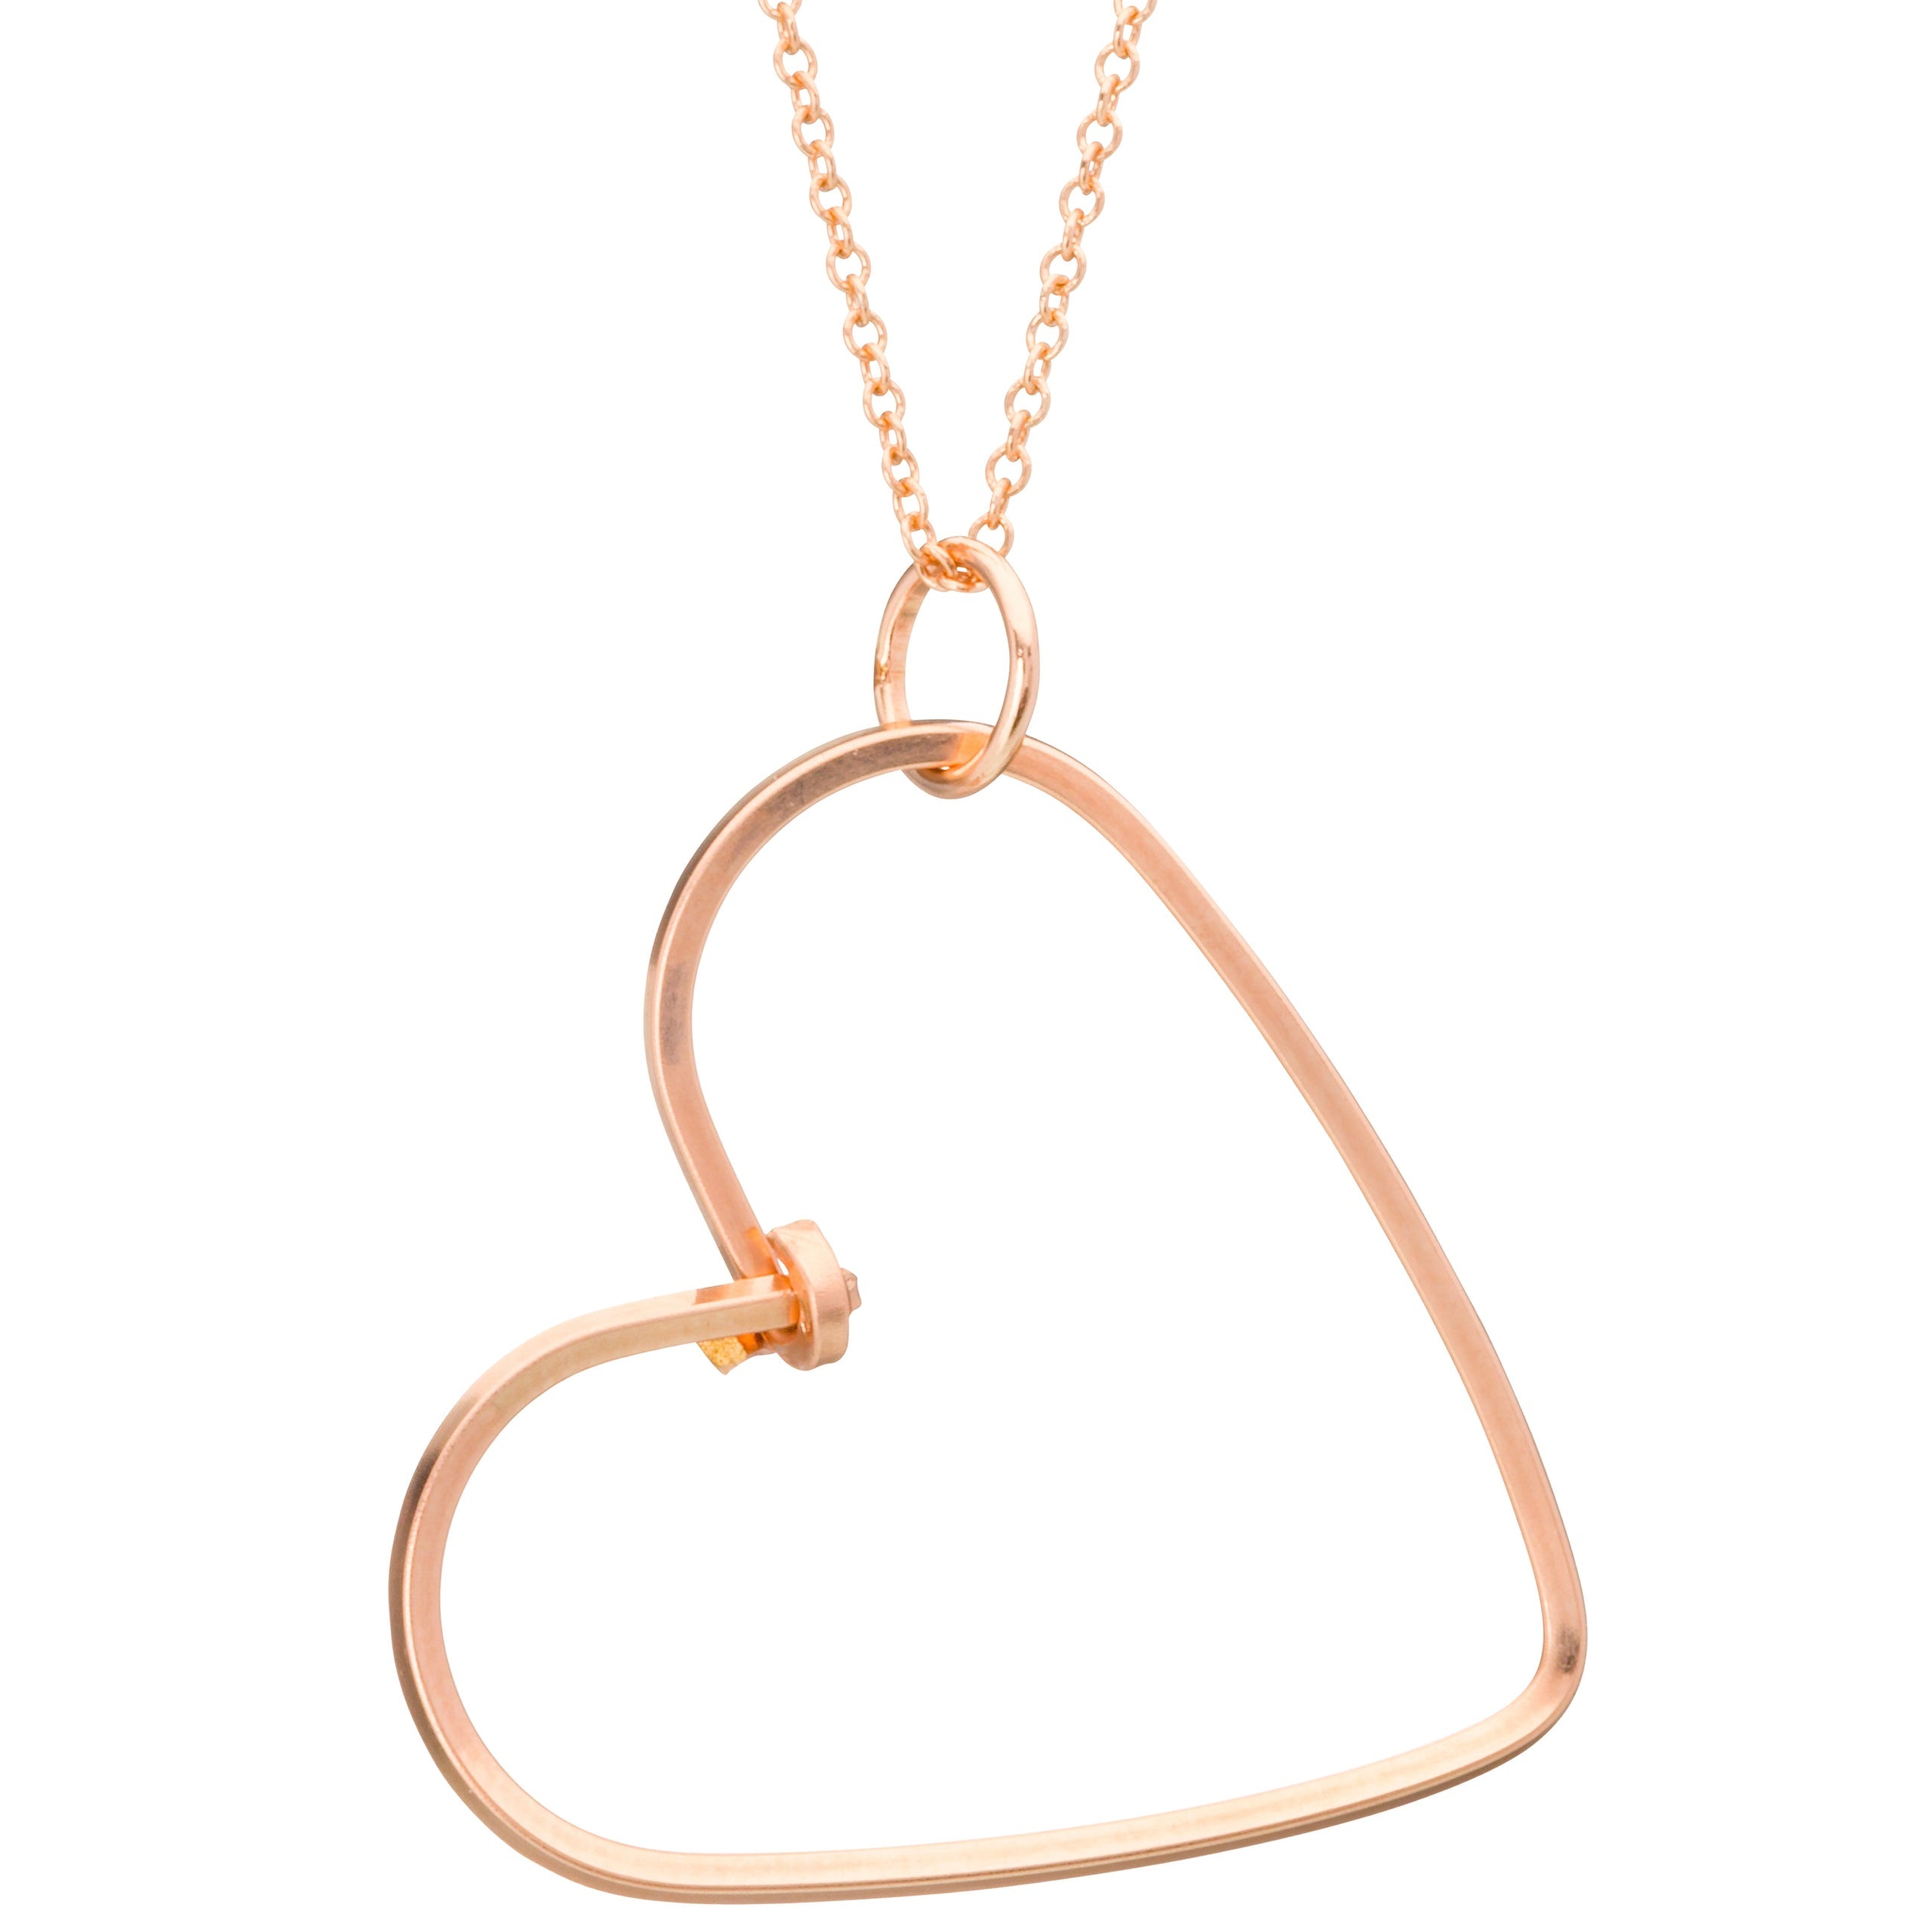 Rose Gold Monti Large Heart Necklace